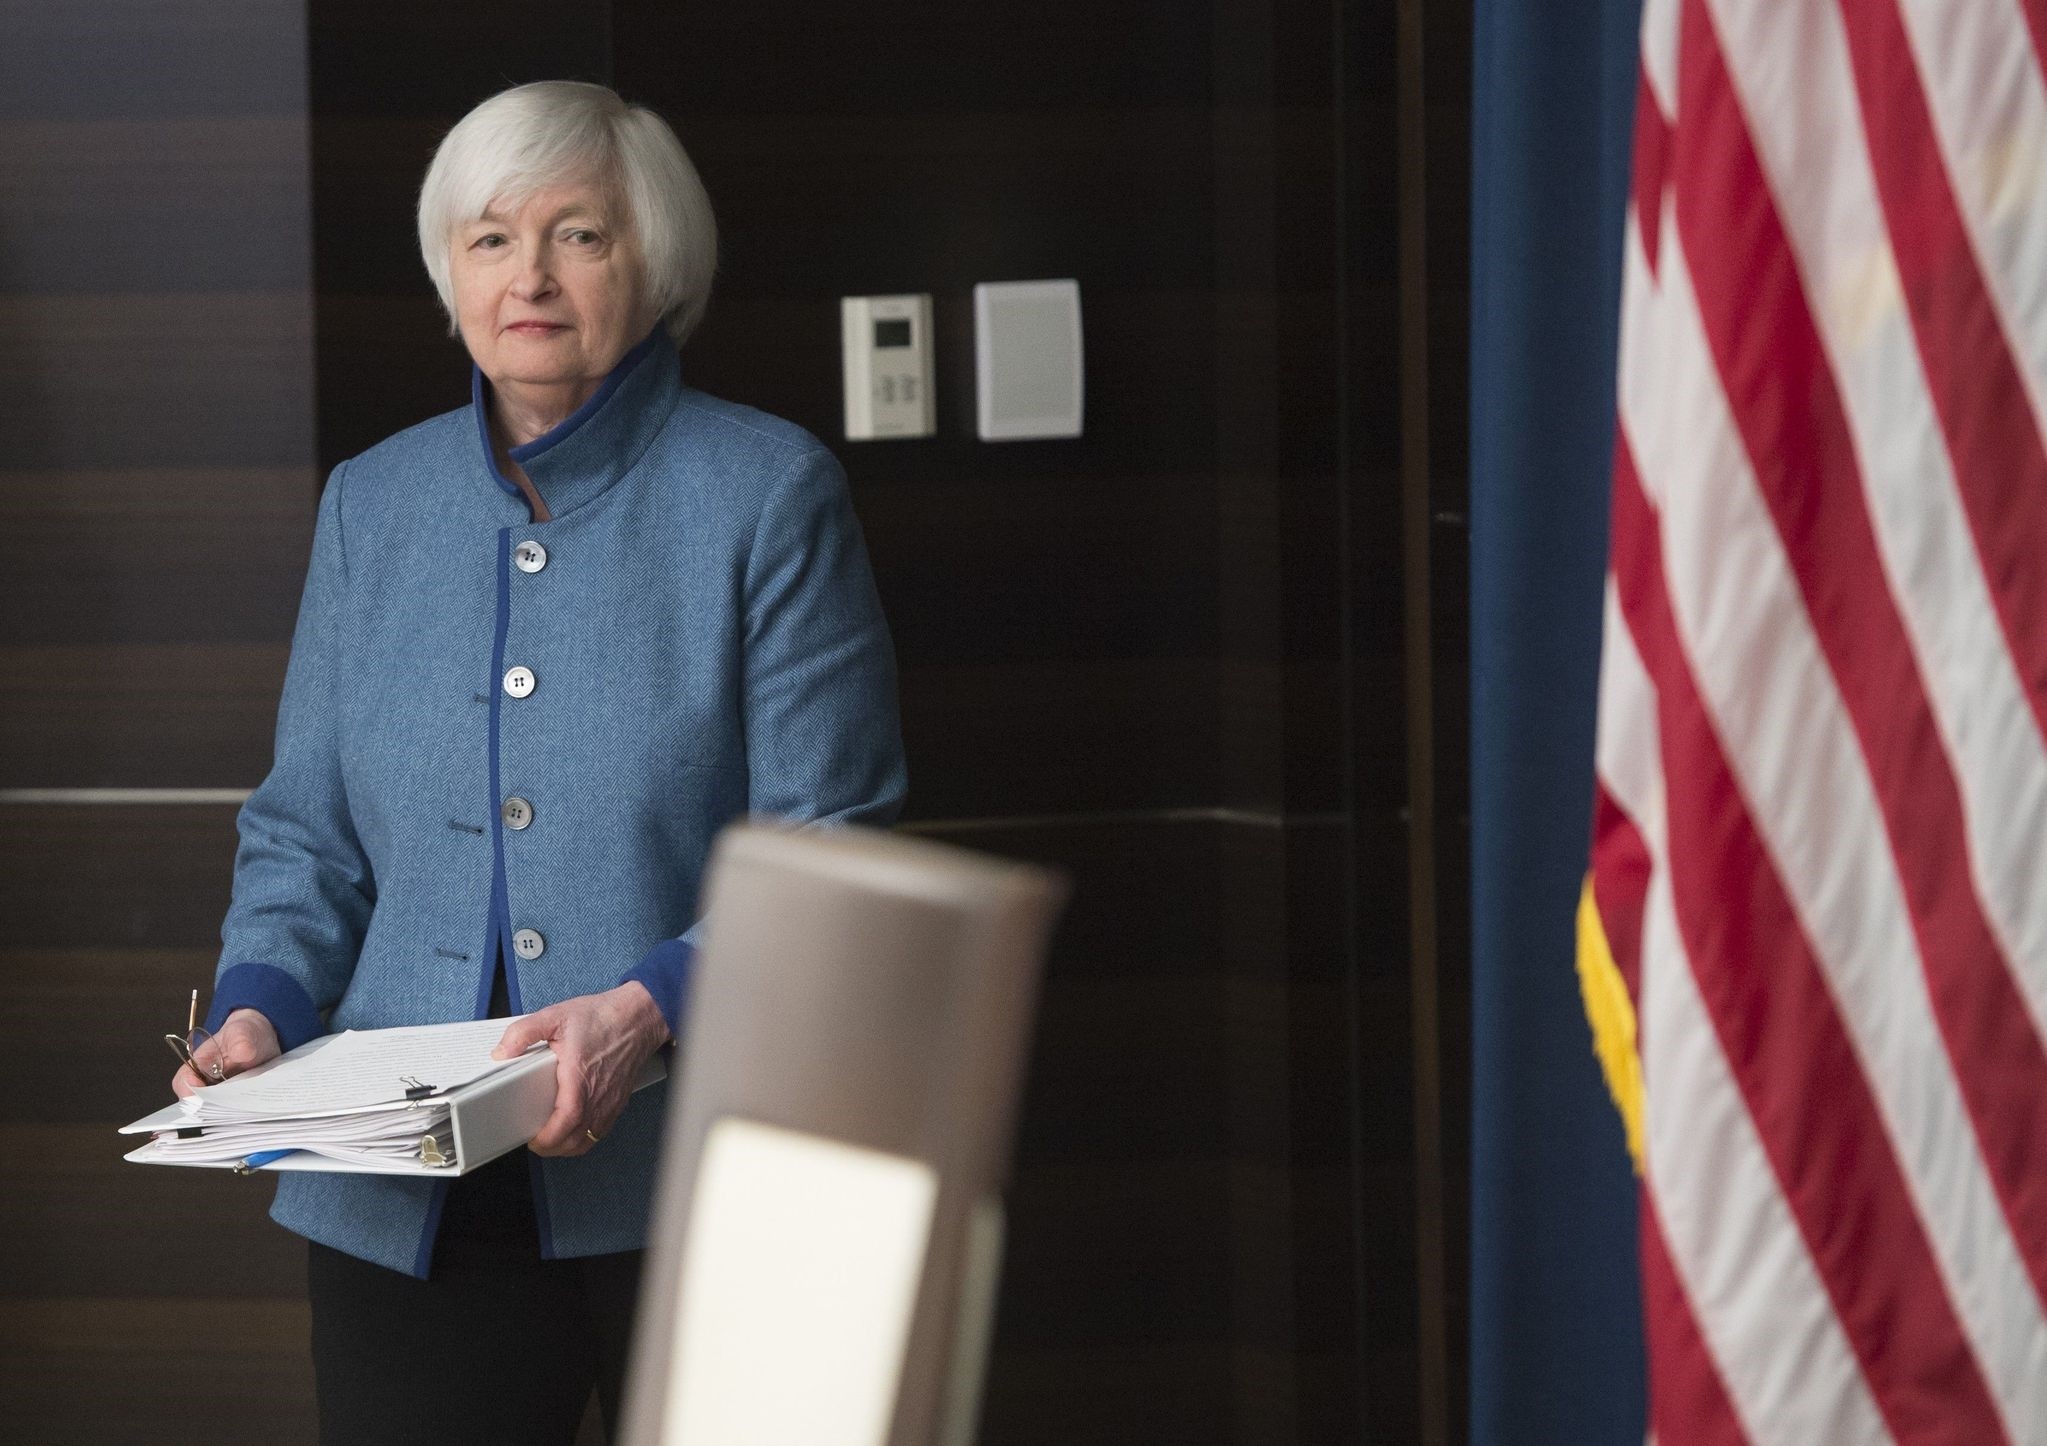 Federal Reserve Chair Janet Yellen arrives to speak during a press conference following the announcement that the Fed will raise interest rates. (AFP Photo)